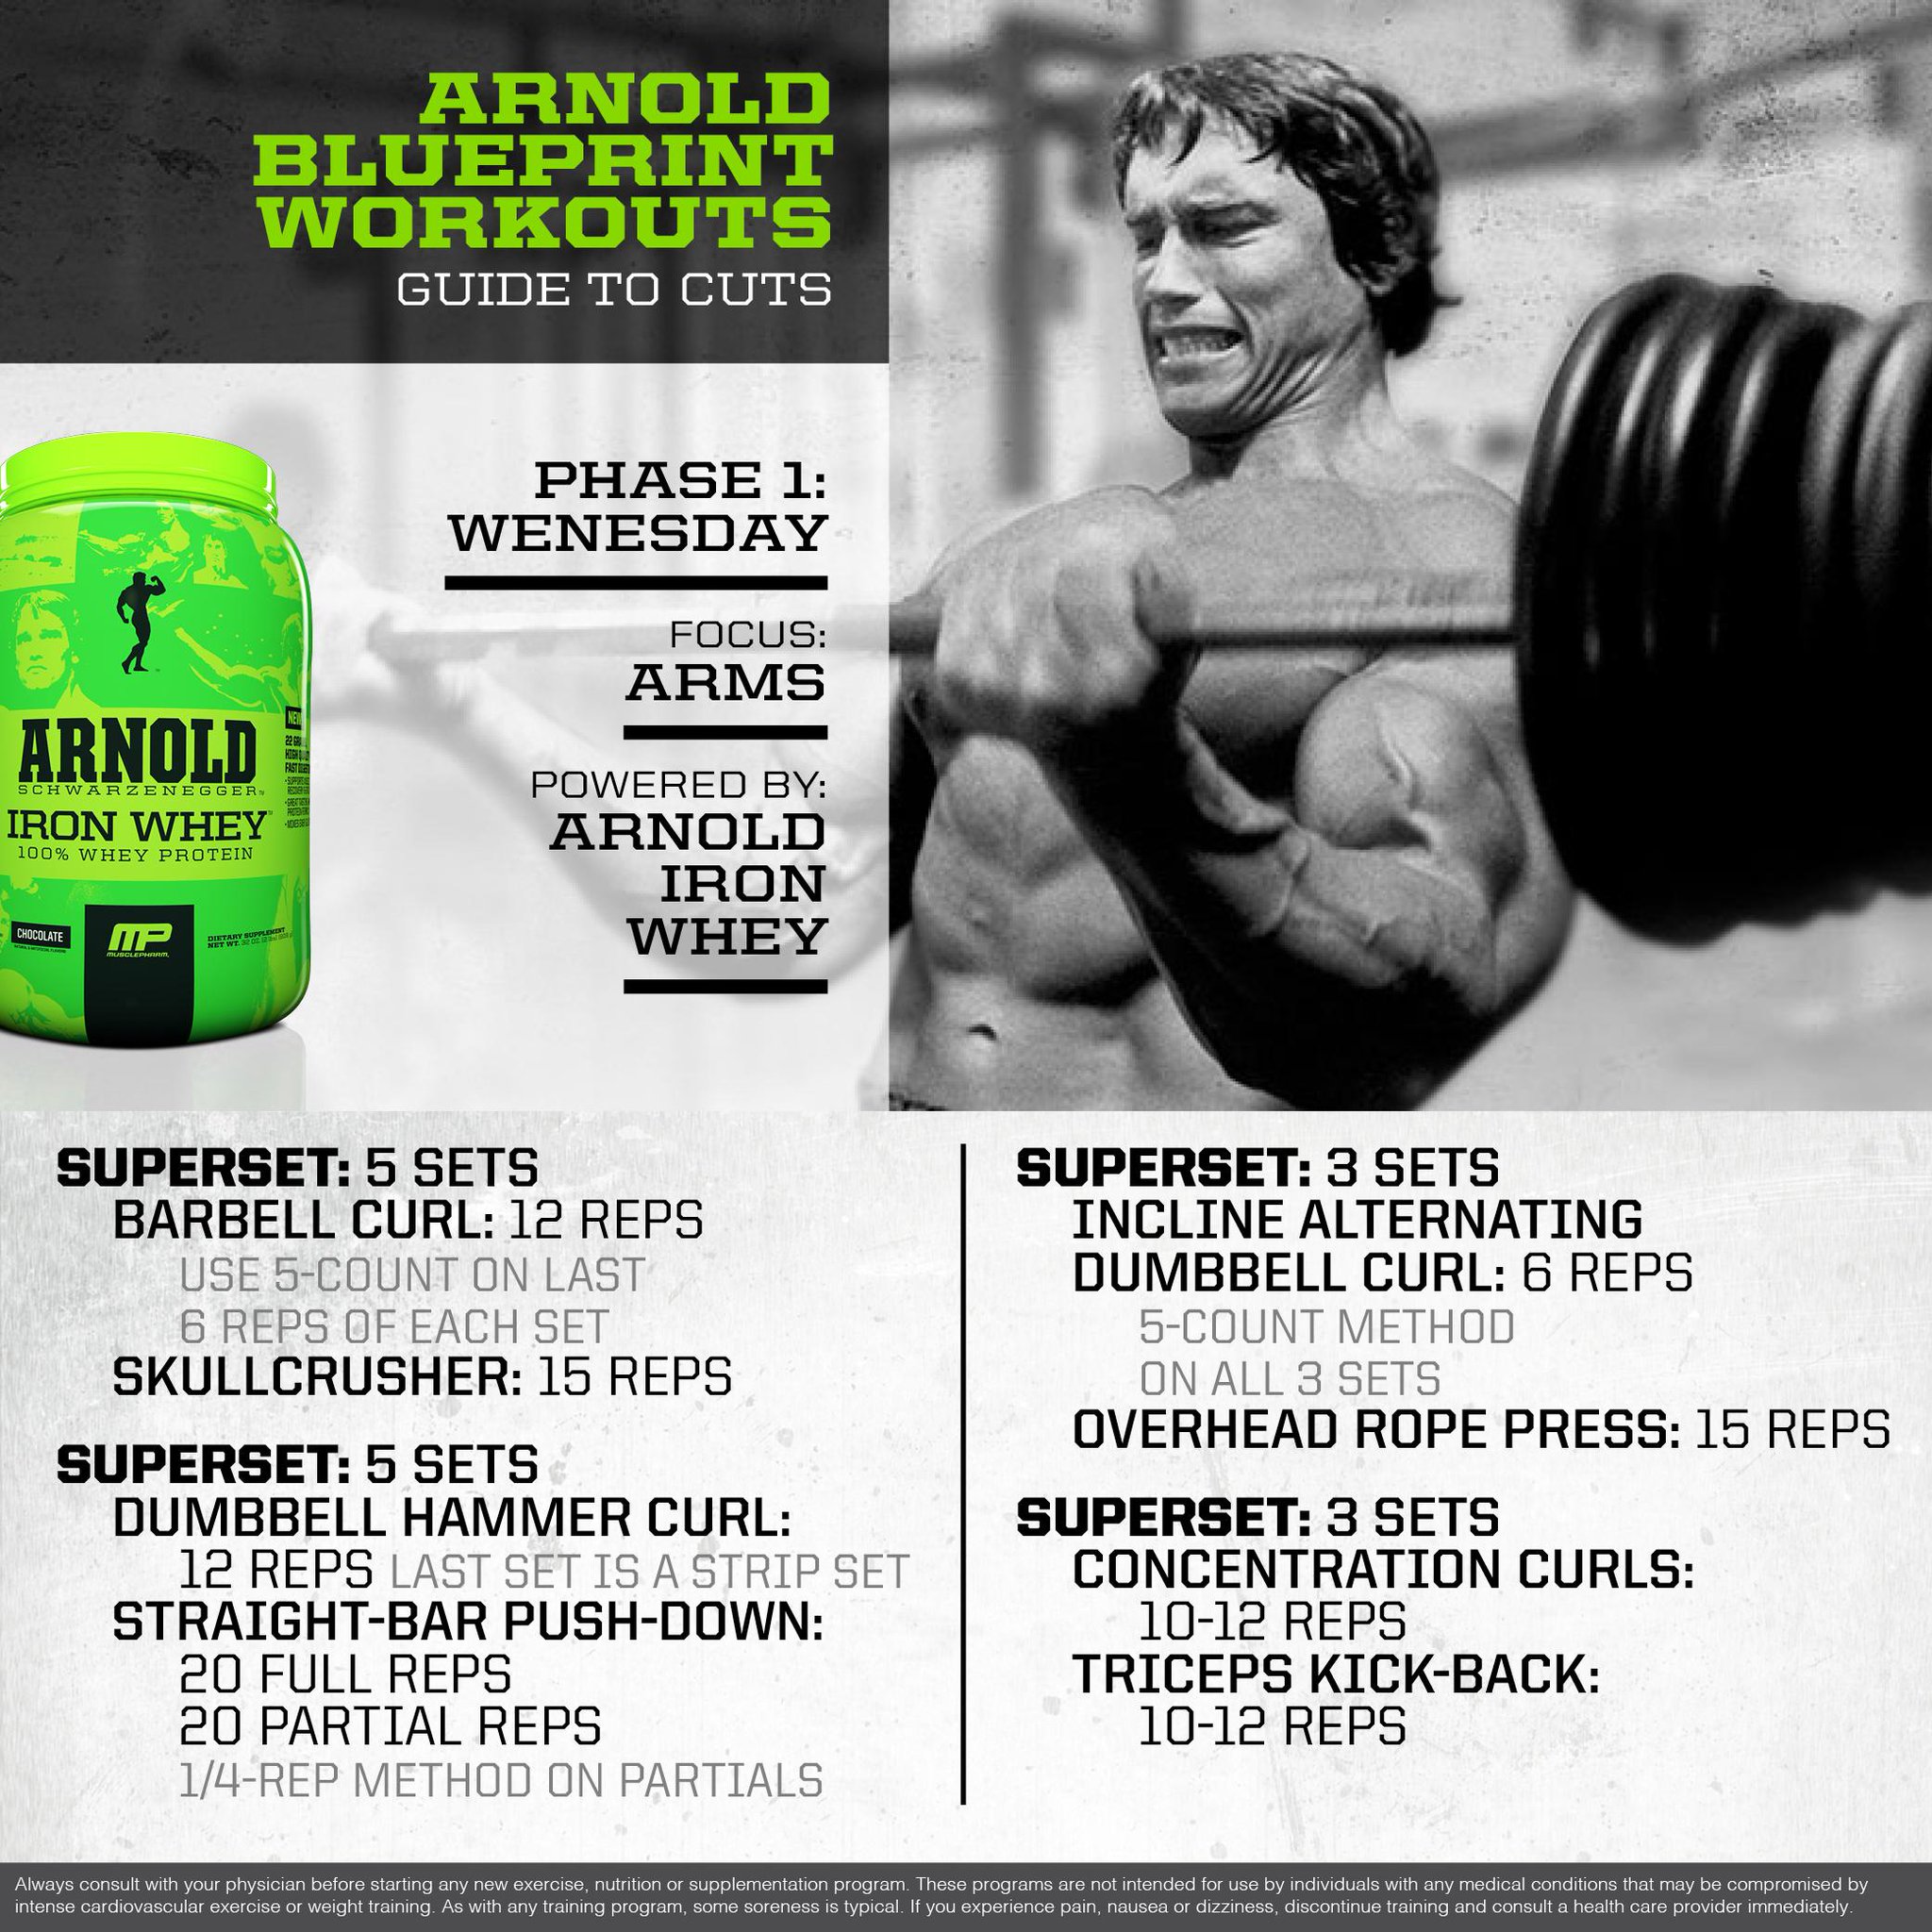 15 Minute Arnold Schwarzenegger Arms And Shoulder Workout for Fat Body